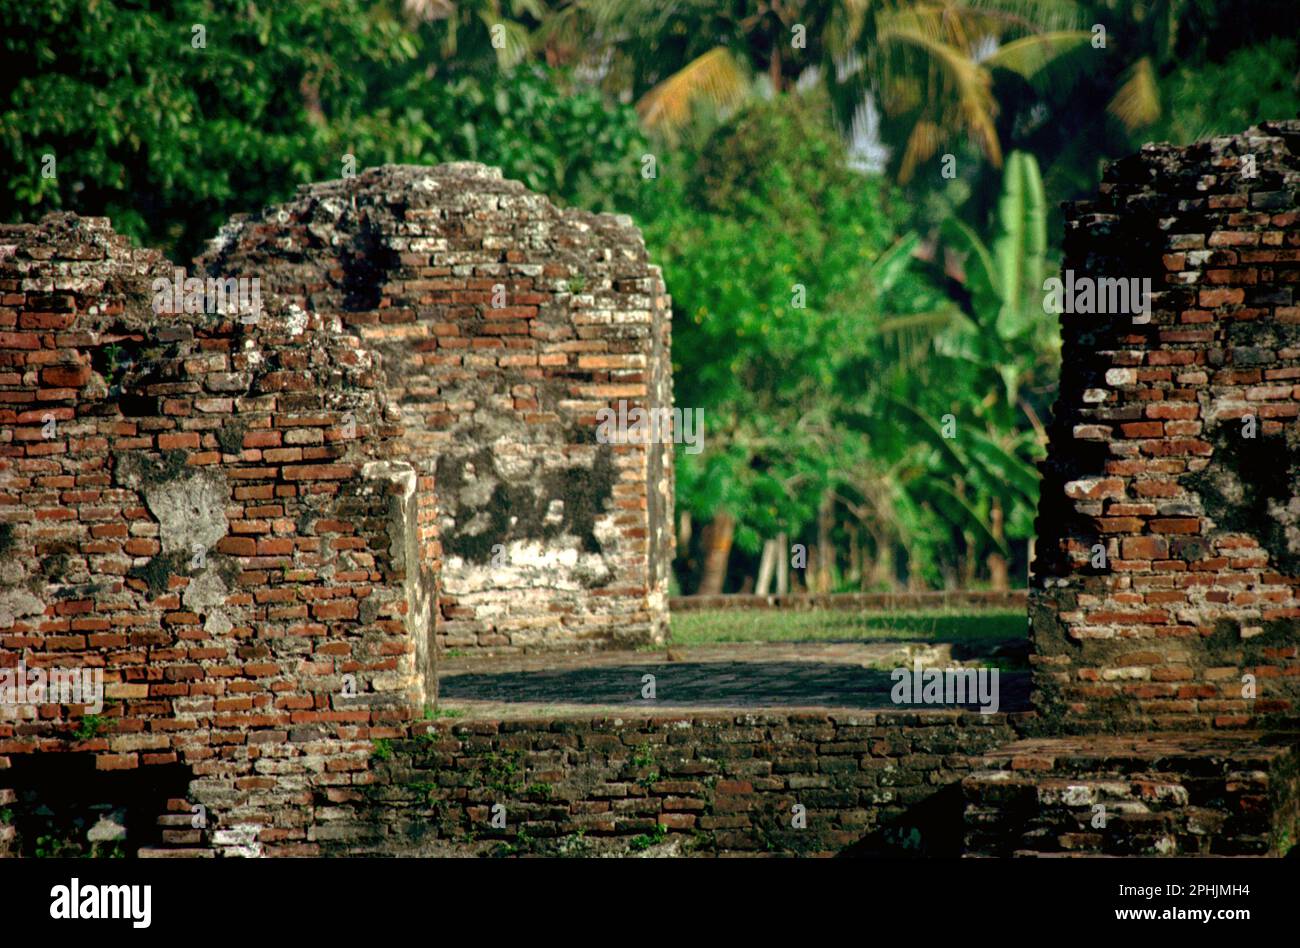 Remaining of a building at Kaibon palace, one of the cultural heritage objects from Banten Sultanate period located in area now called Banten Lama (Old Banten) in Serang, Banten, Indonesia. 'The sustainability of cultural heritage is strongly linked to the effective participation of local communities in the conservation and management of these resources,' according to a team of scientists led by Sunday Oladipo Oladeji in their research article published on Sage Journals on October 28, 2022. Banten Lama (Old Banten) area was a part of the important port of Banten Sultanate. Stock Photo